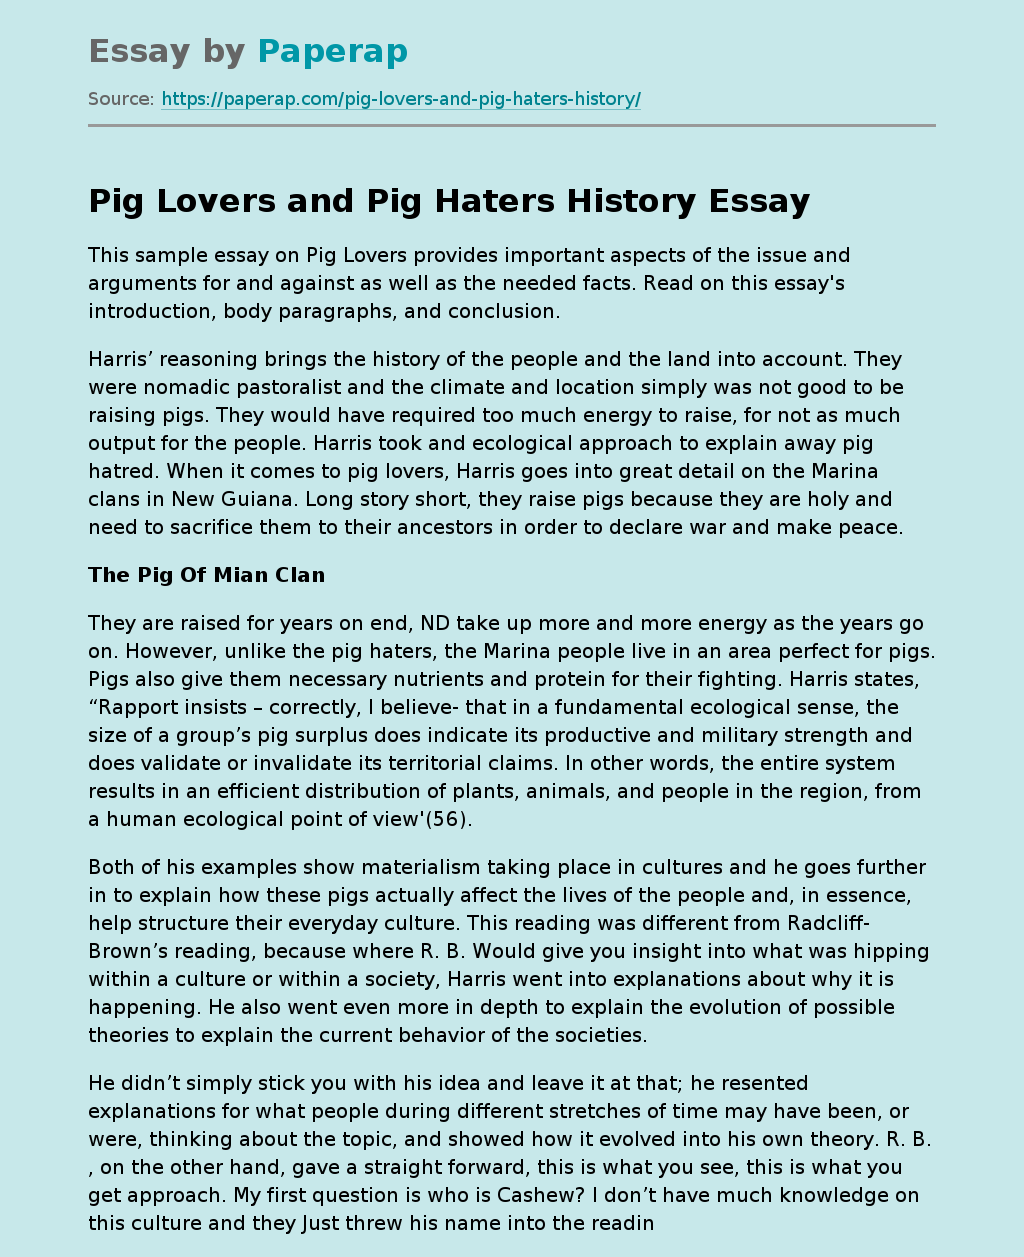 Pig Lovers and Pig Haters History